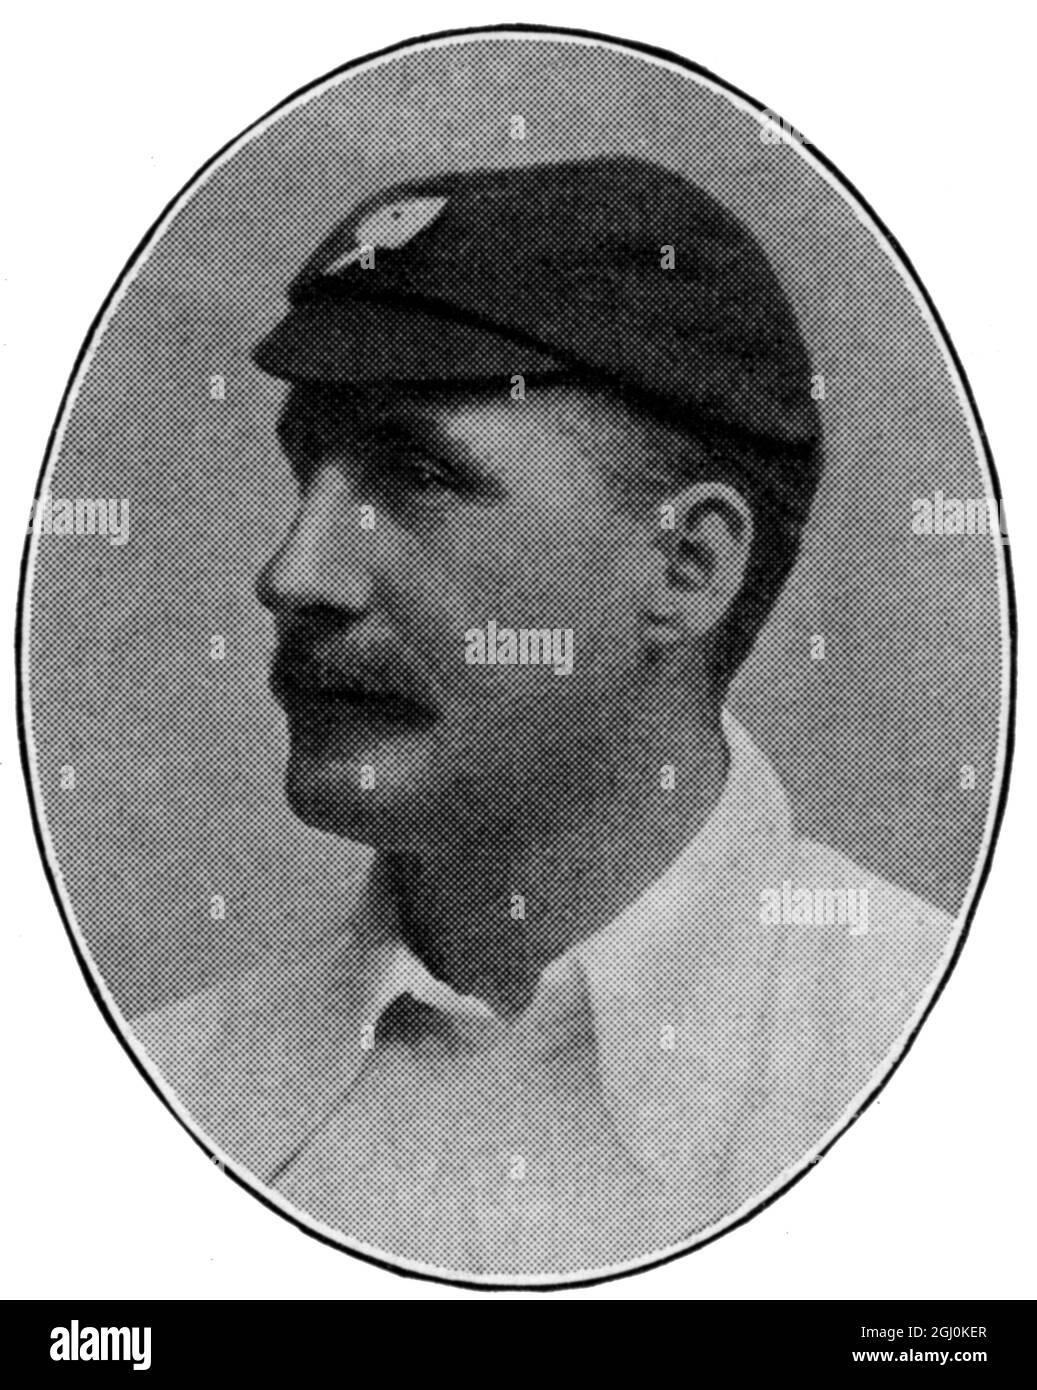 Lord Hawke : County Cricket Player Yorkshire Martin Bladen Hawke, 7th Baron Hawke (Gainsborough 16 August 1860 - 10 October 1938 in Edinburgh) was an English cricketer and administrator . He captained Yorkshire County Cricket Club for 28 seasons and played in five Test matches, four of which he captained (and all four of which were won). Stock Photo